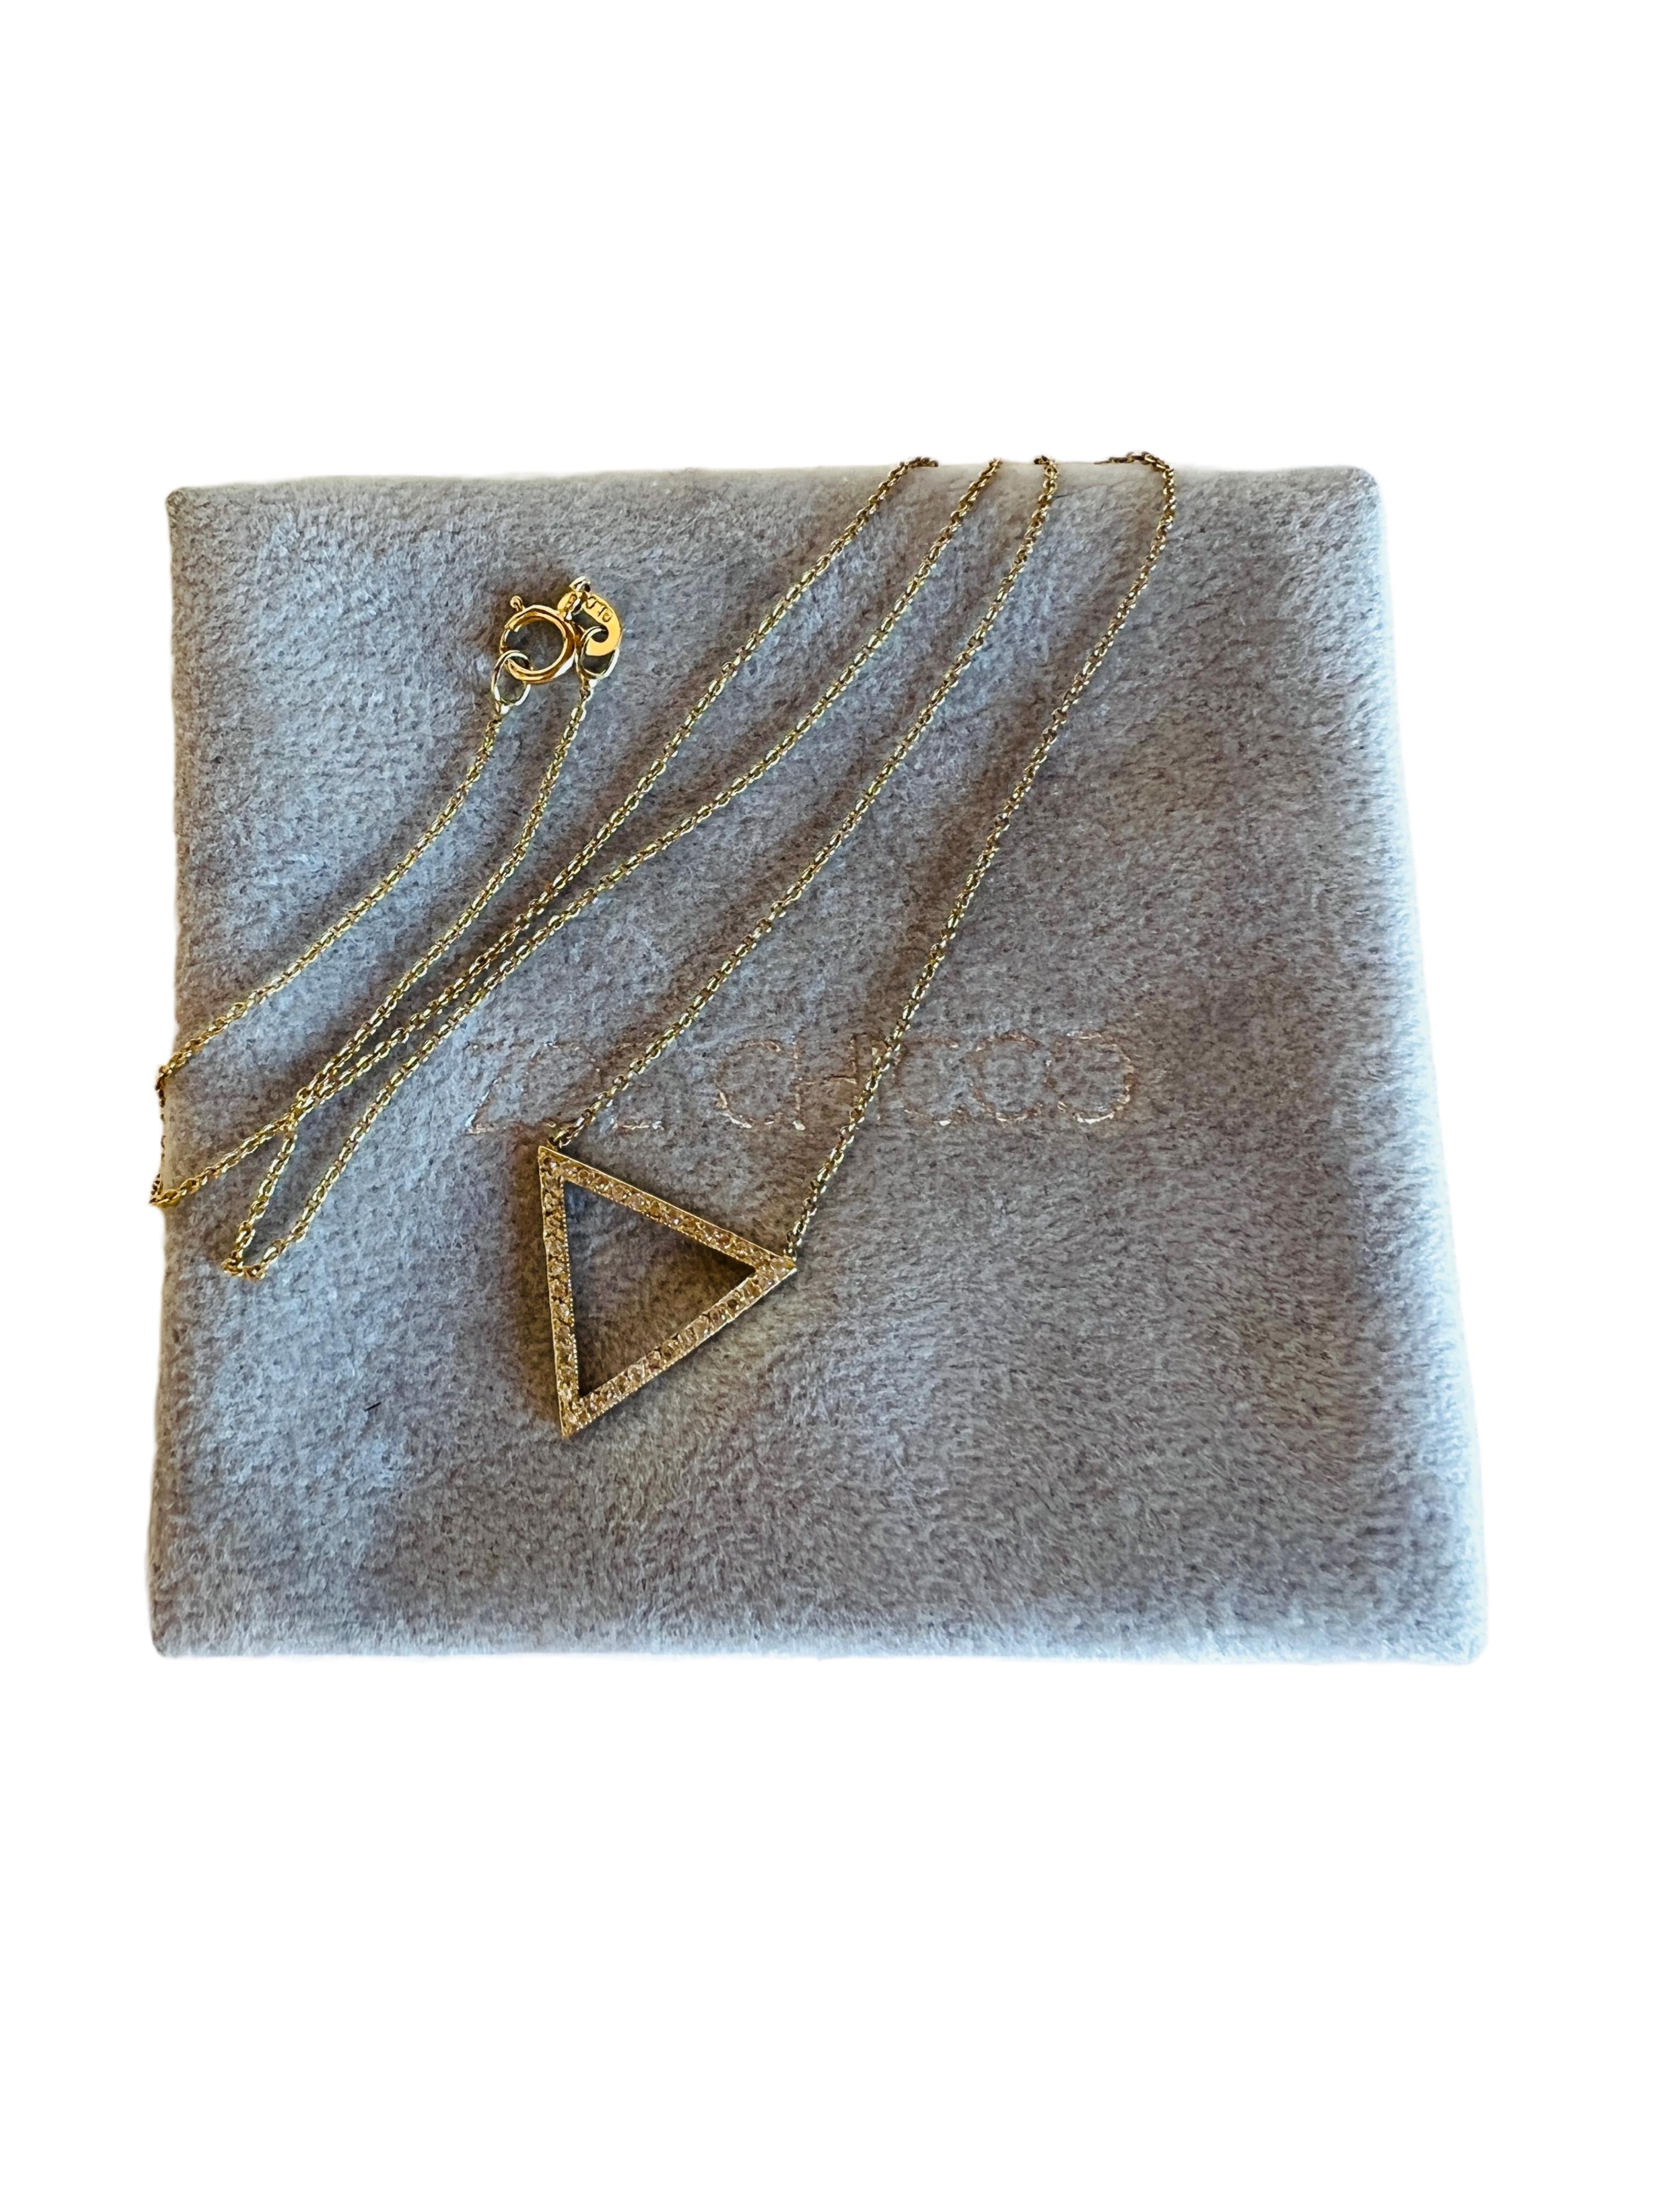 Zoe Chicco 14k Yellow Gold Diamond Triangle Pendant Station Necklace In Good Condition For Sale In Sausalito, CA